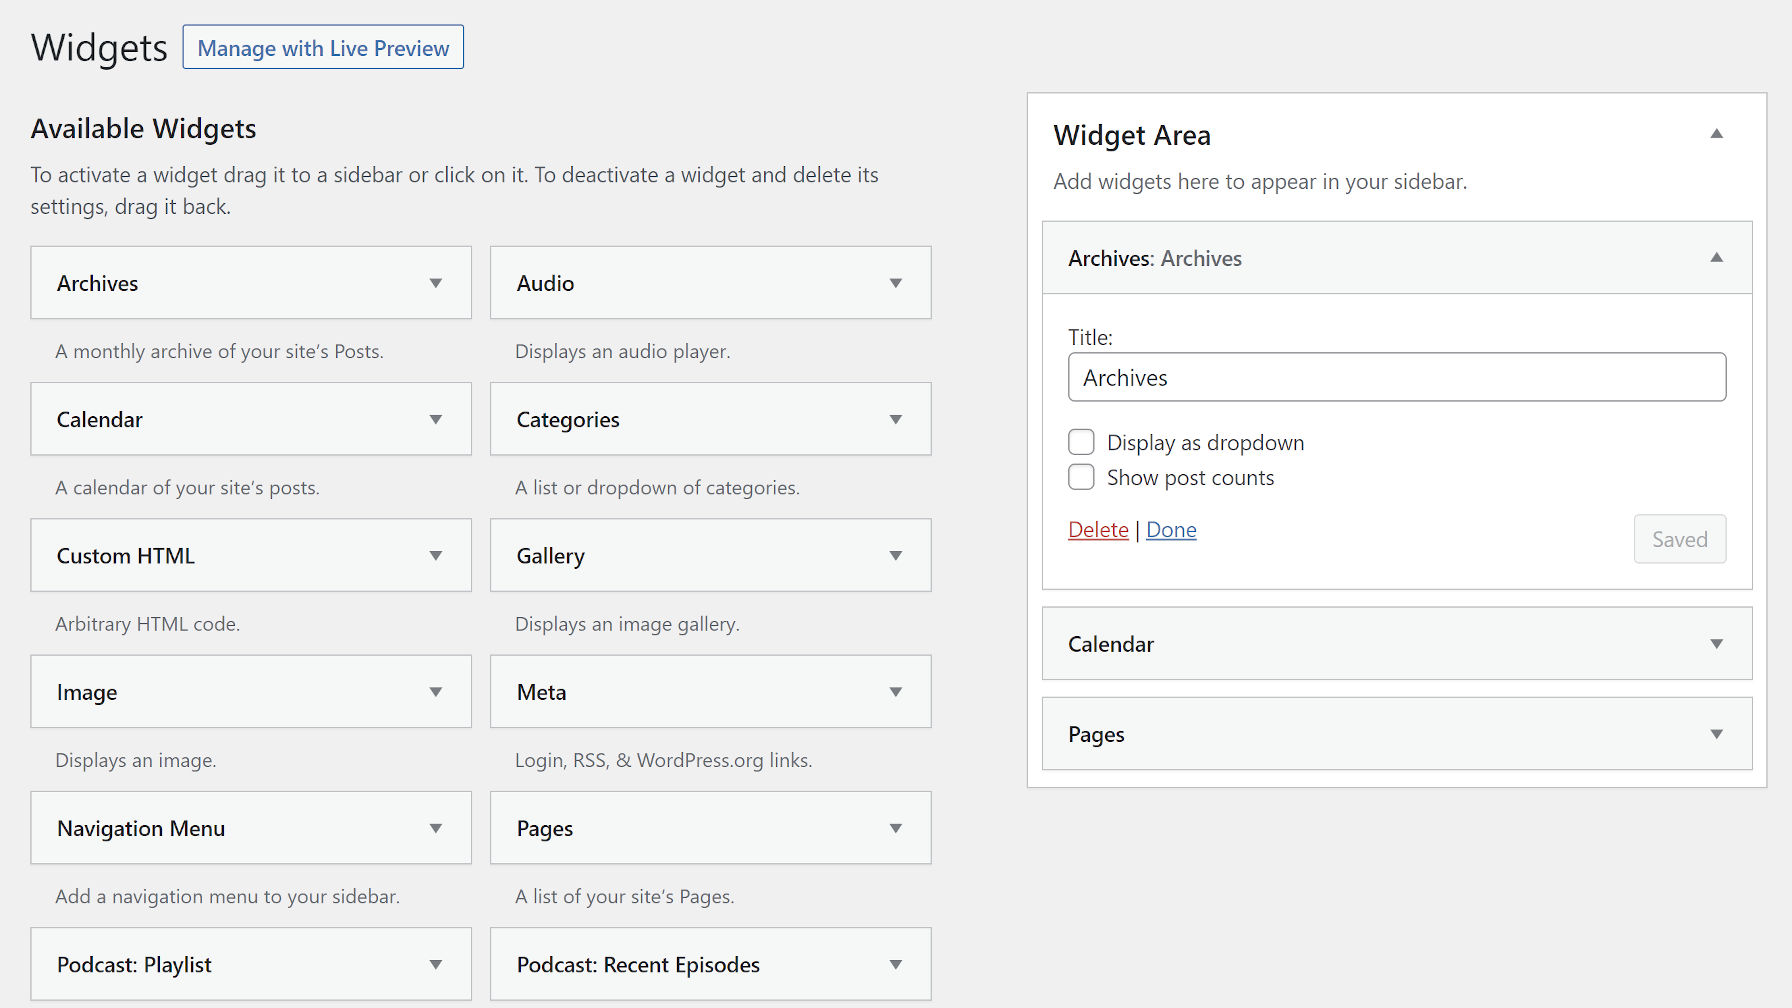 The traditional WordPress widgets screen with draggable widgets and sidebars.